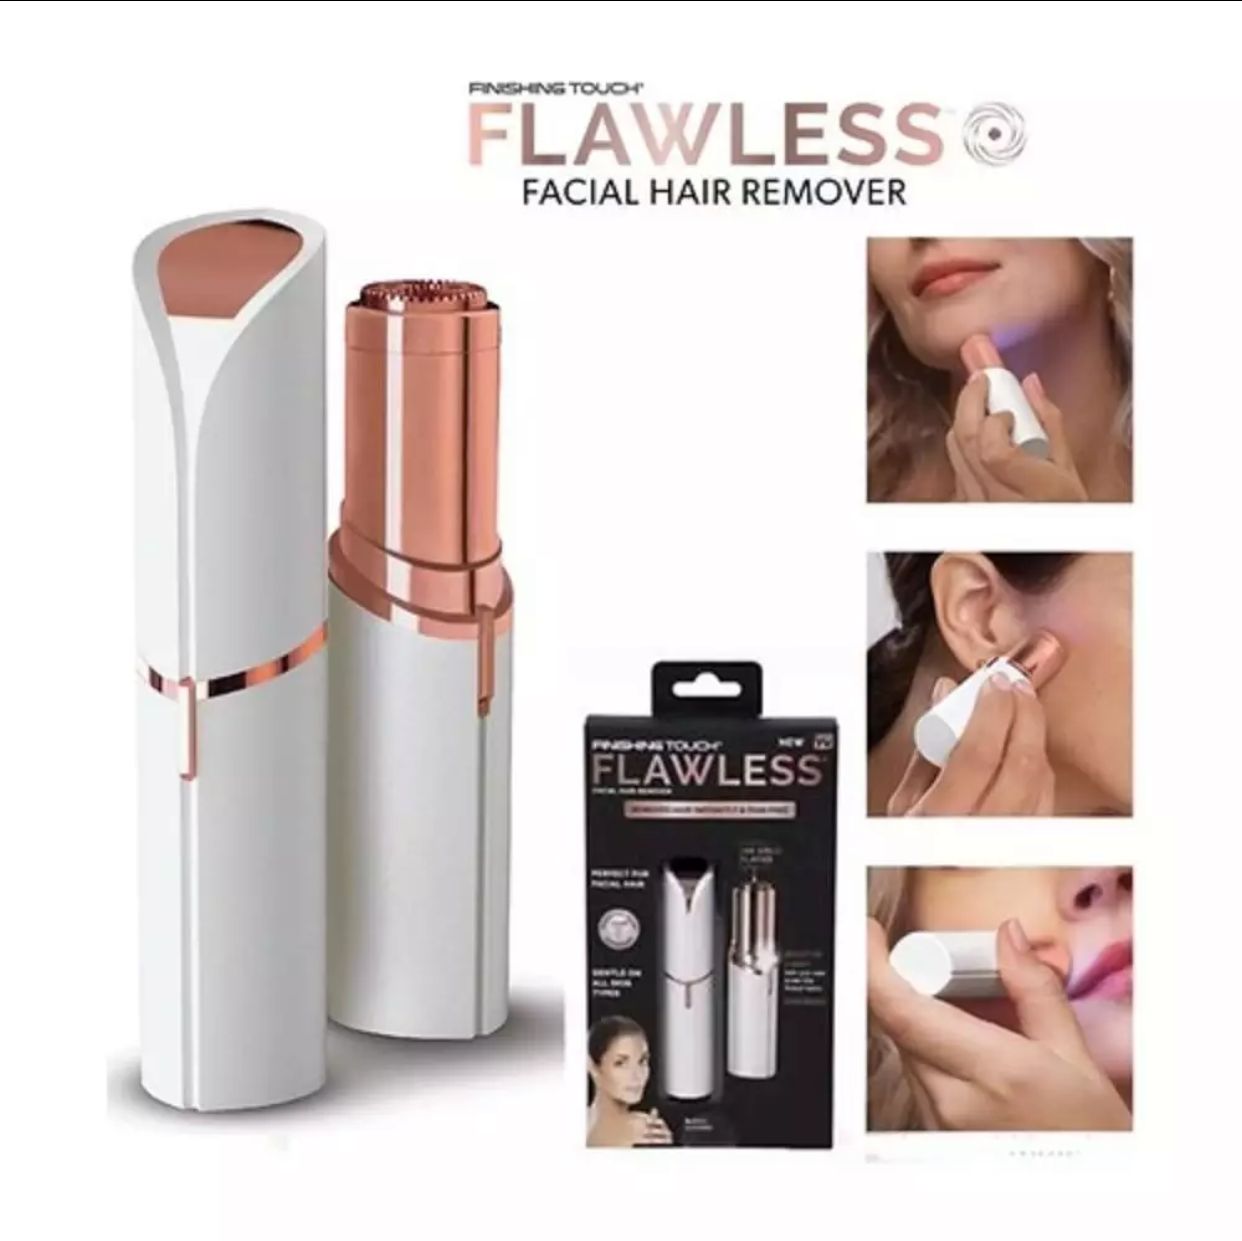 Flawless Facial Hair Remover (Cell Operated)